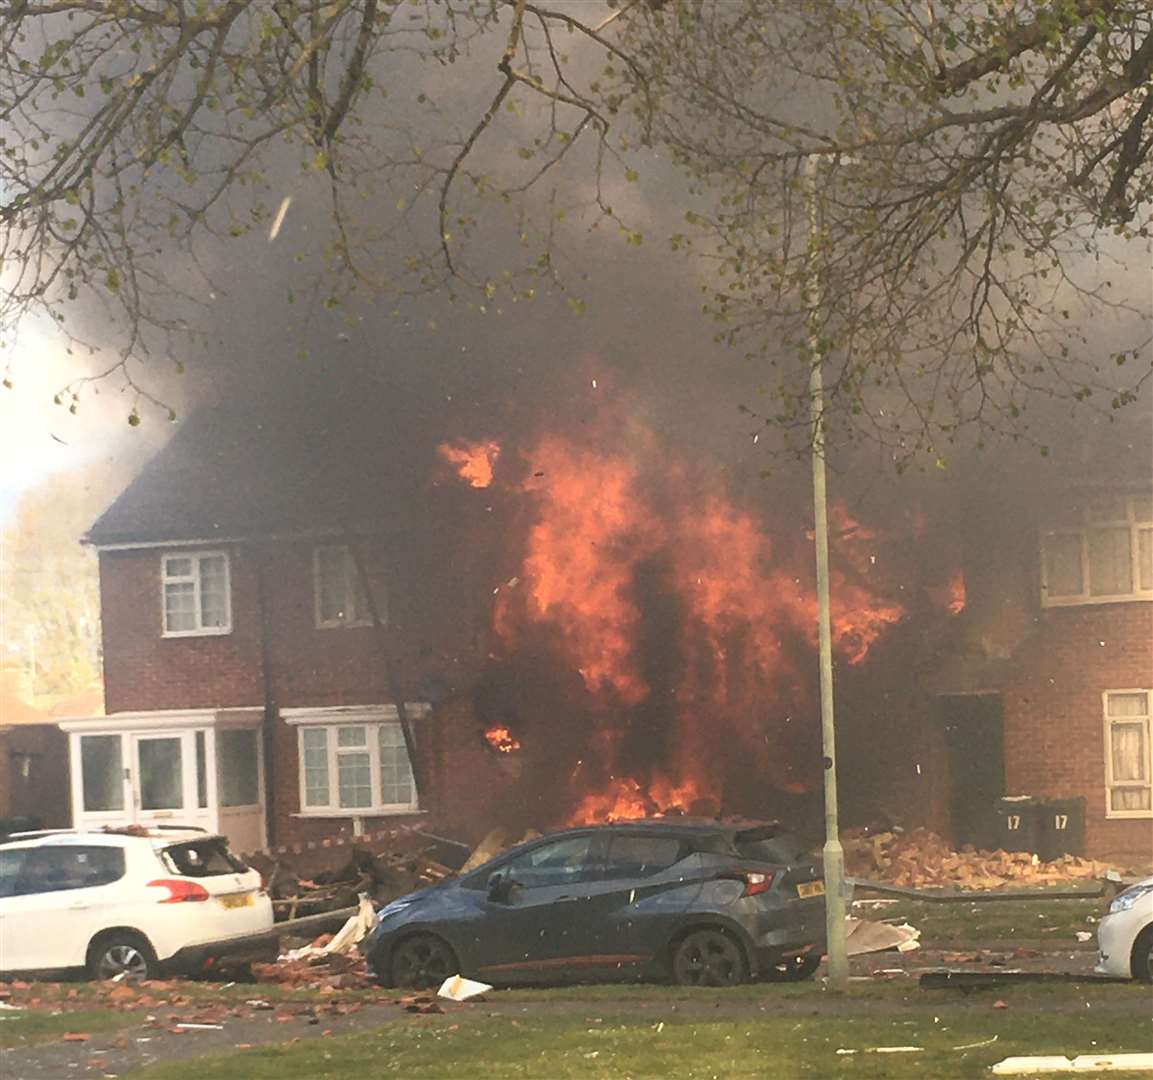 The immediate aftermath of the explosion in Mill View, Willesborough